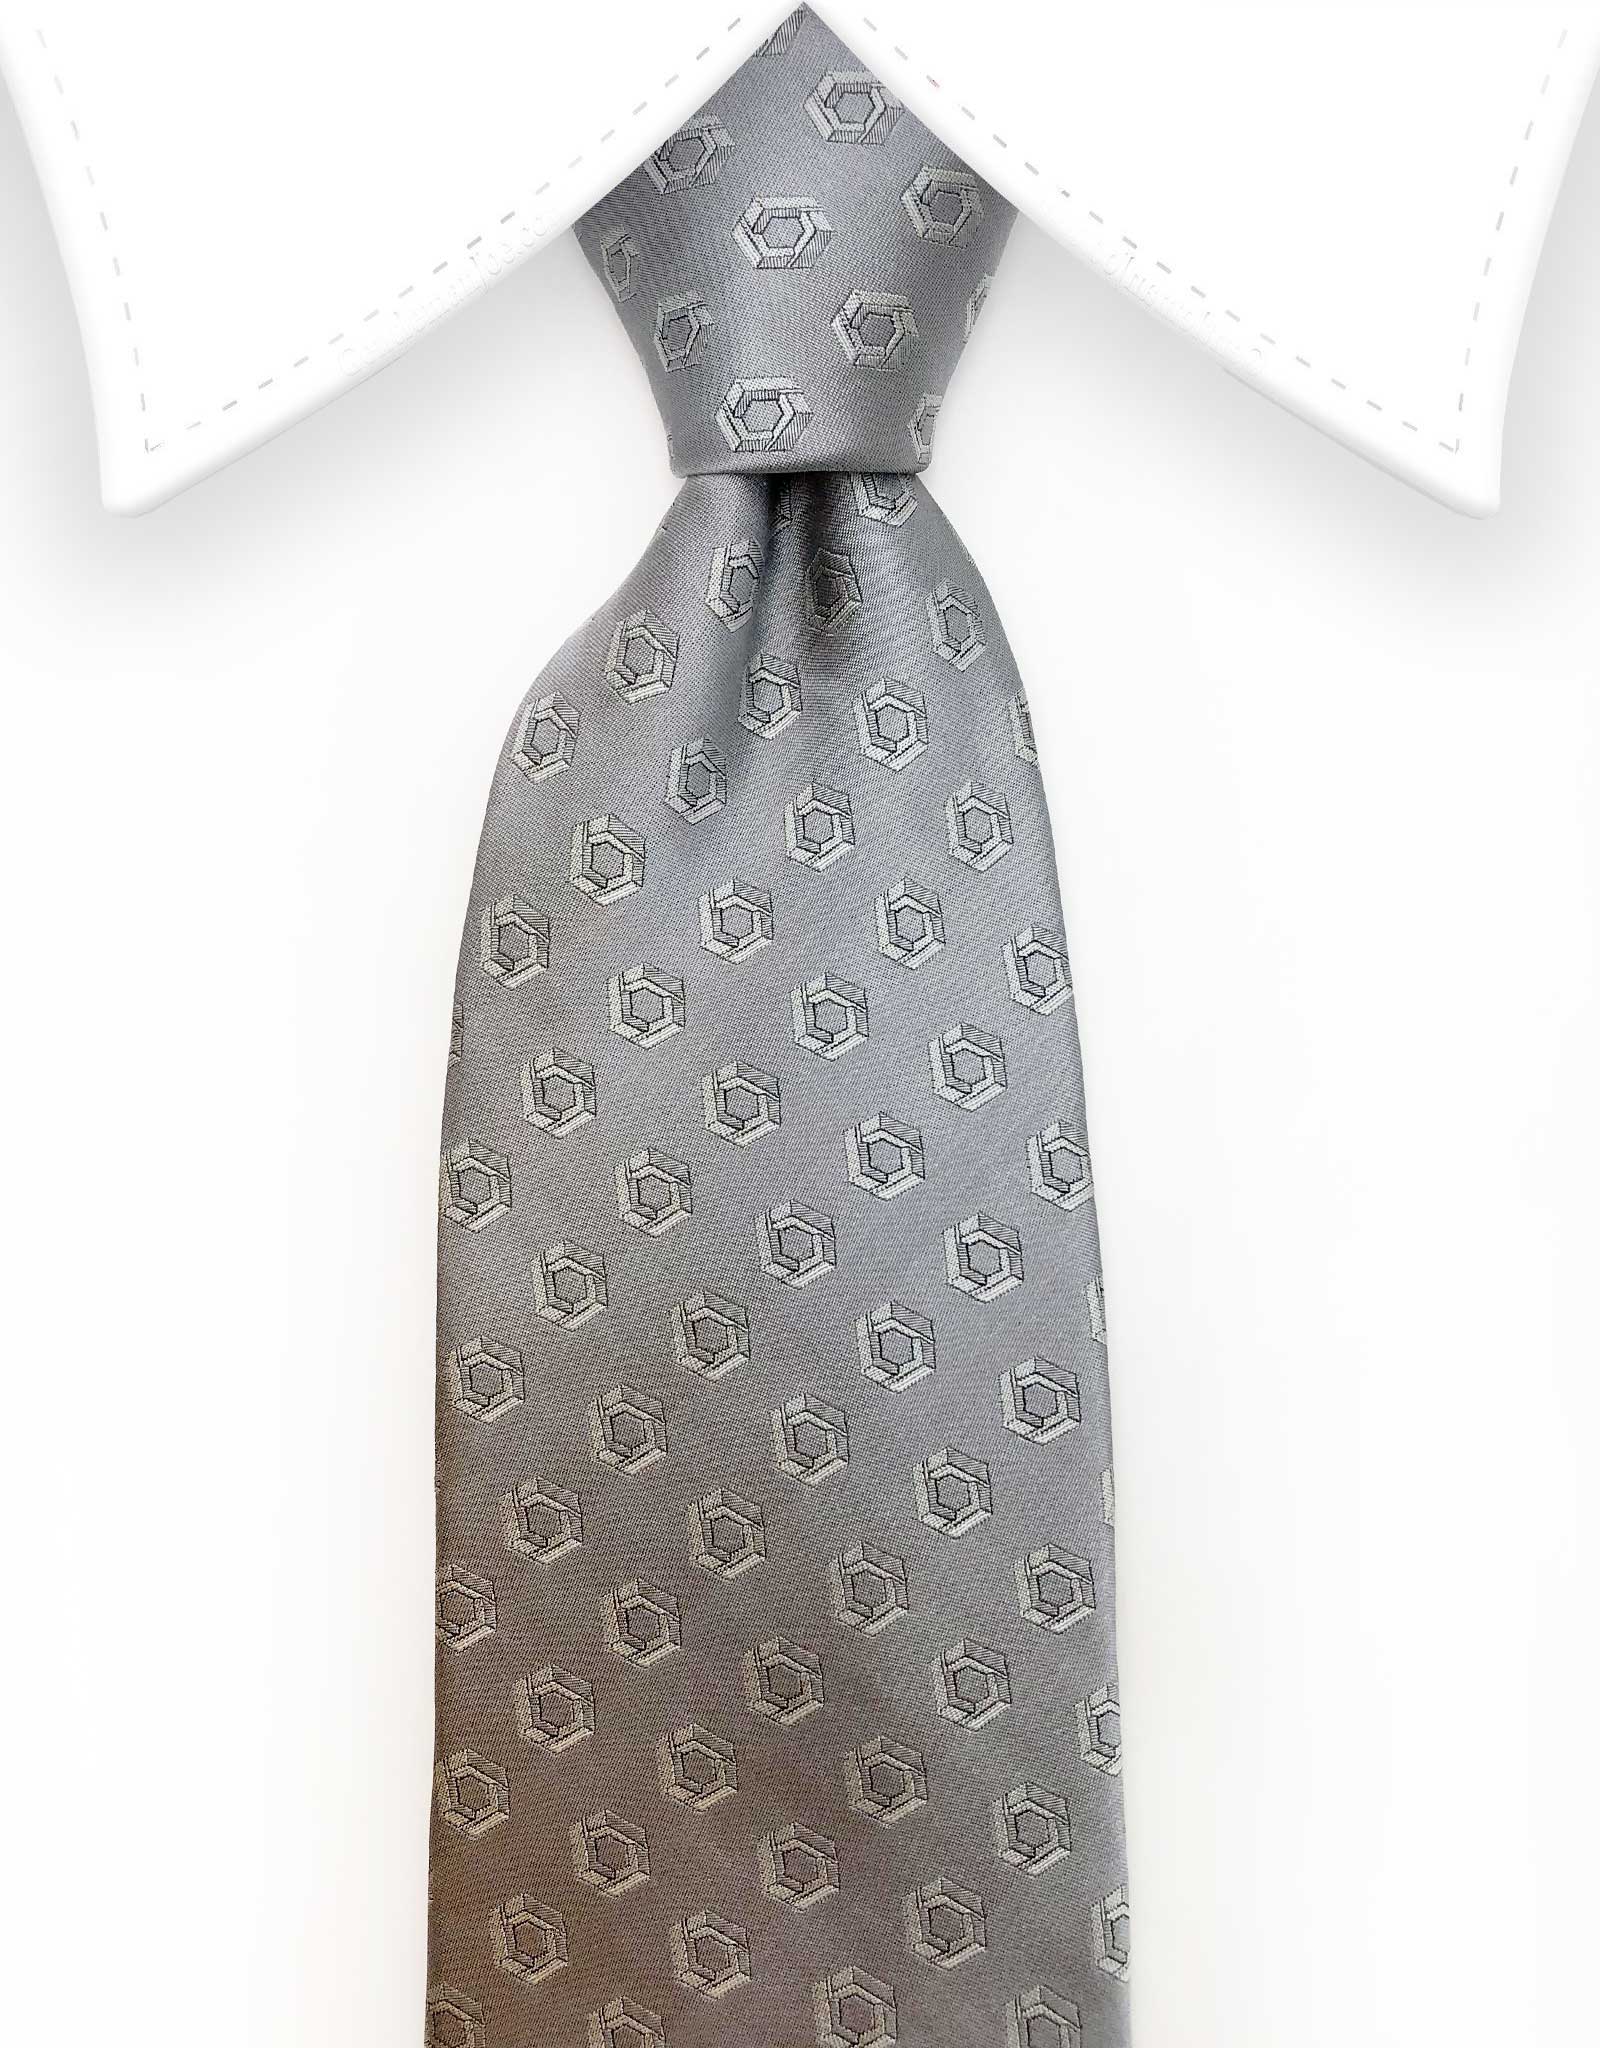 silver tie with design